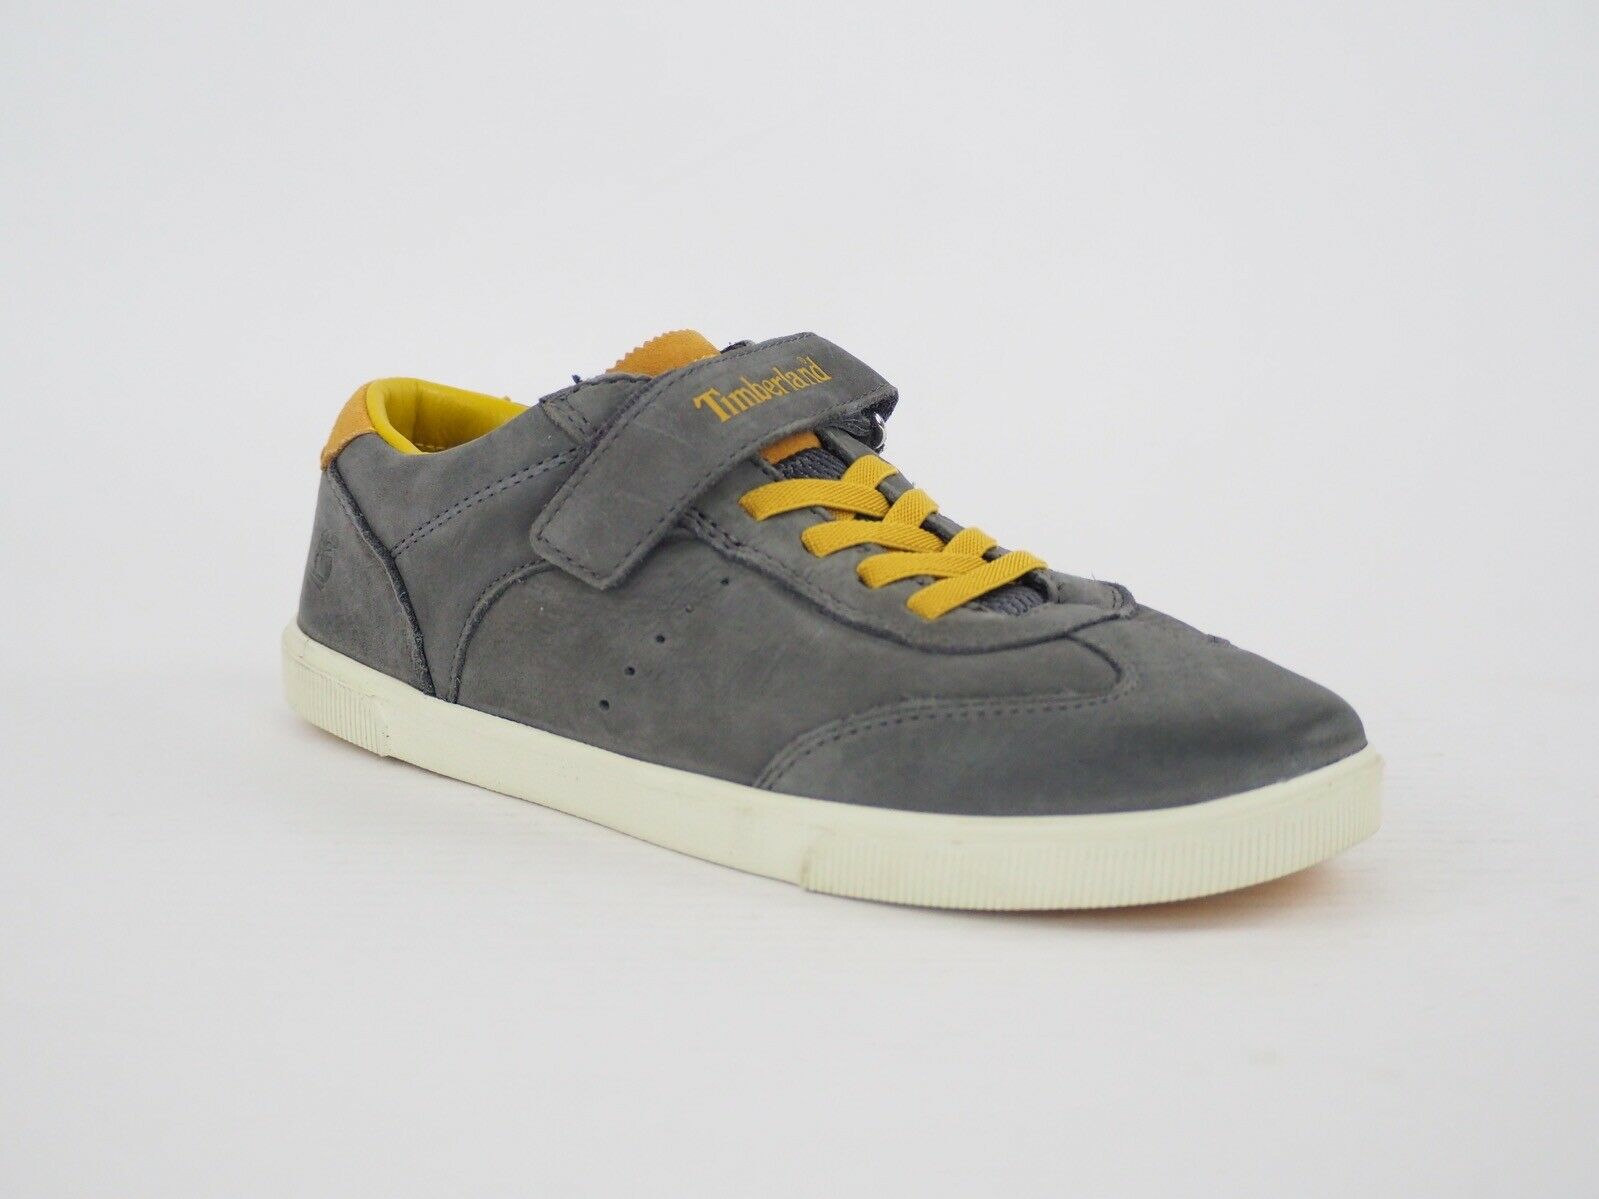 Juniors Timberland Slim Cupsole Hookset A1CX9 Grey Leather Lace Up Casual Shoes - London Top Style